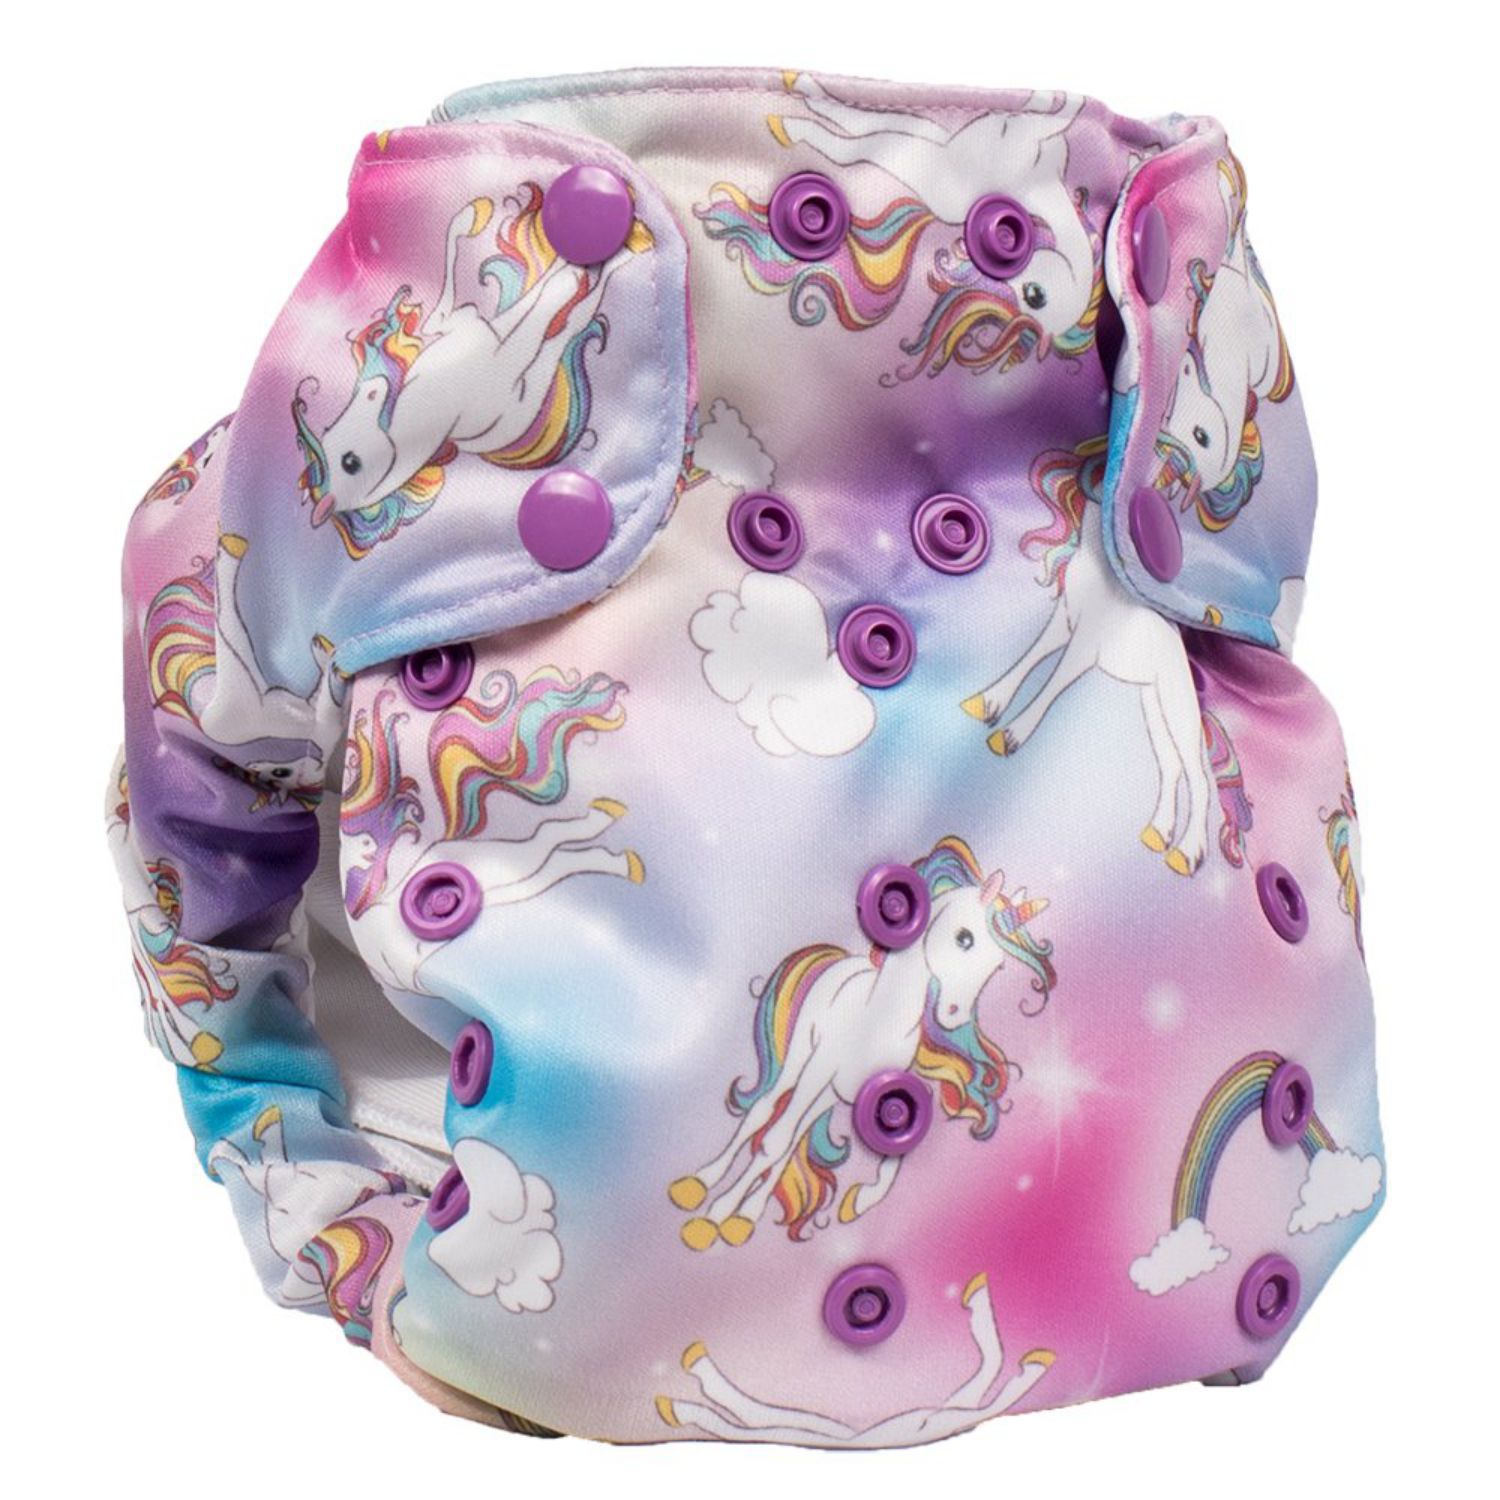 Smart Bottoms Dream Diaper 2.0 AIO One Size Muster: Chasing Rainbows